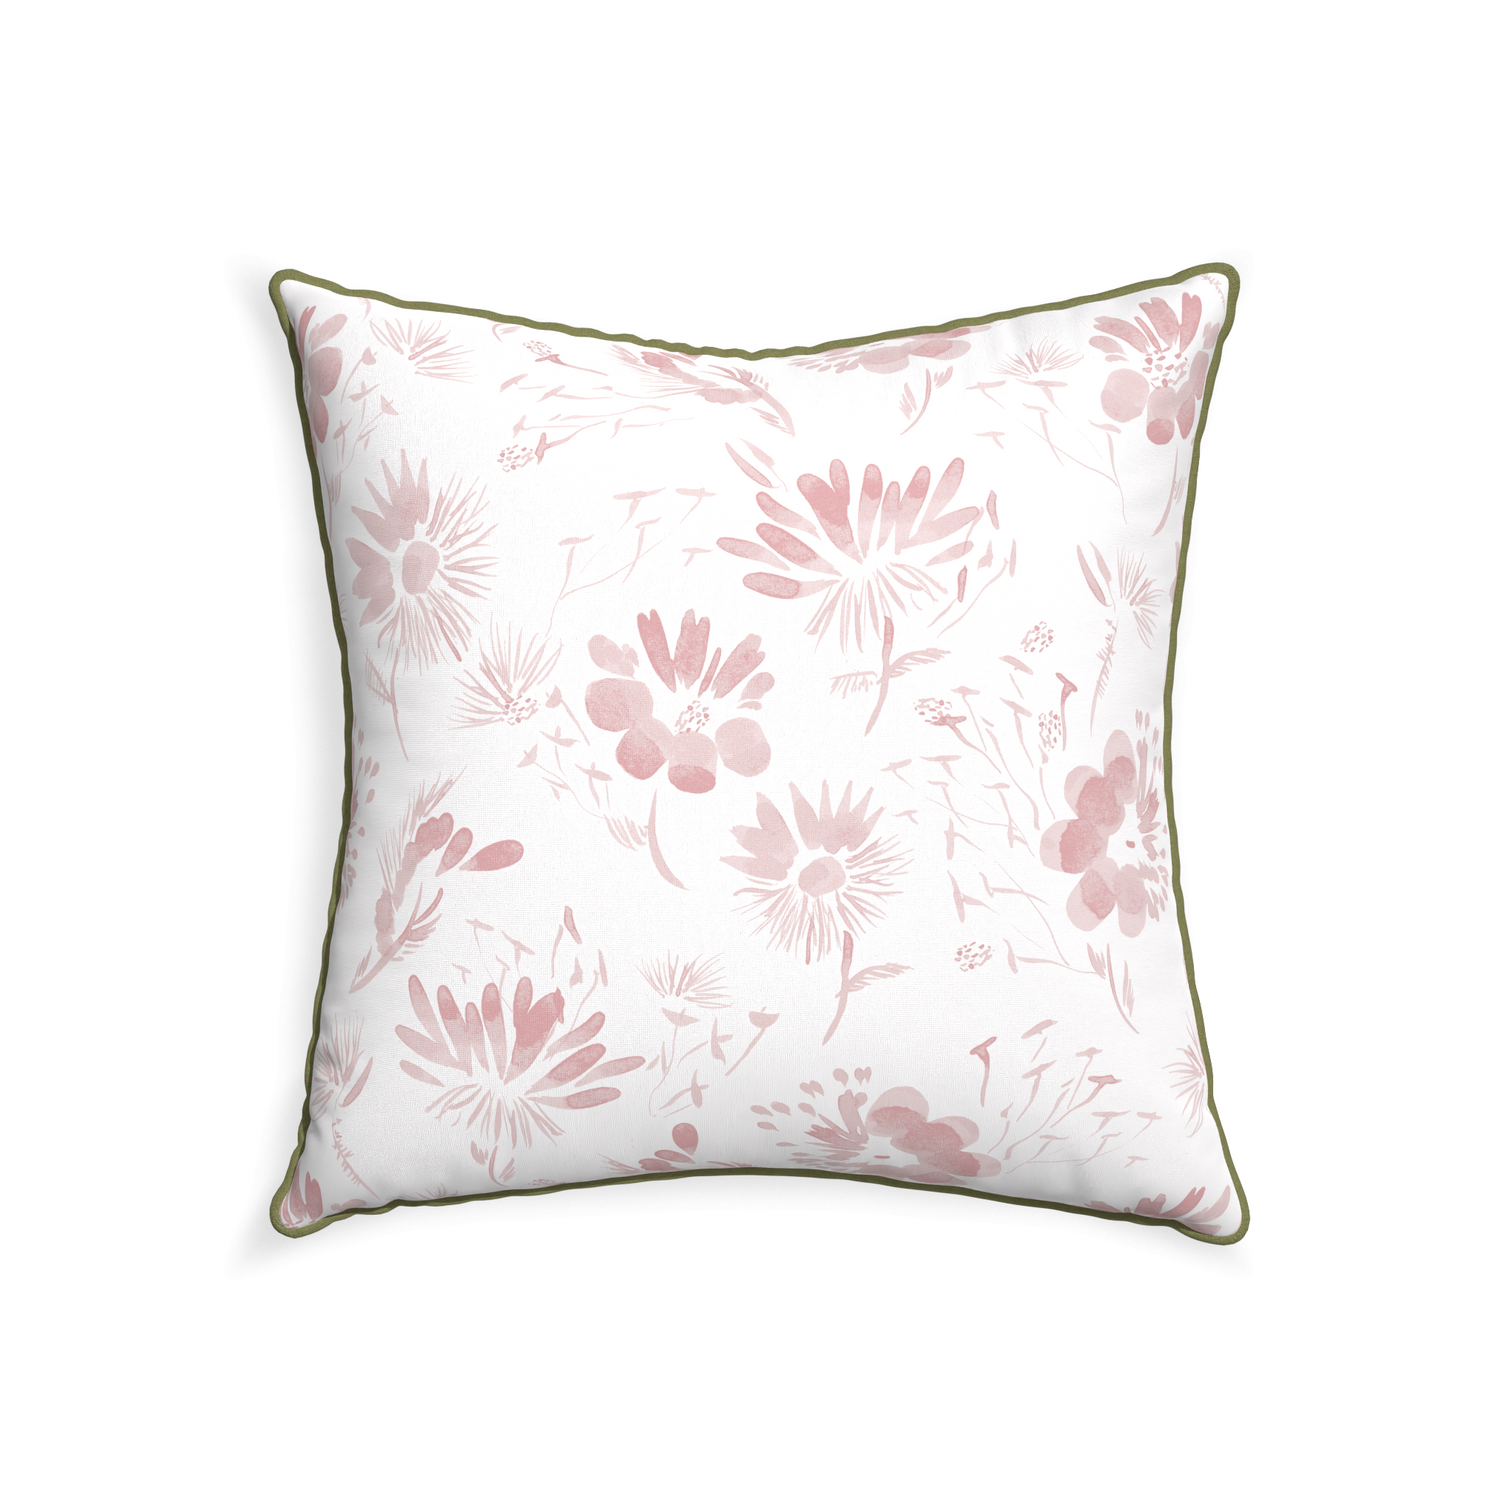 22-square blake custom pillow with moss piping on white background